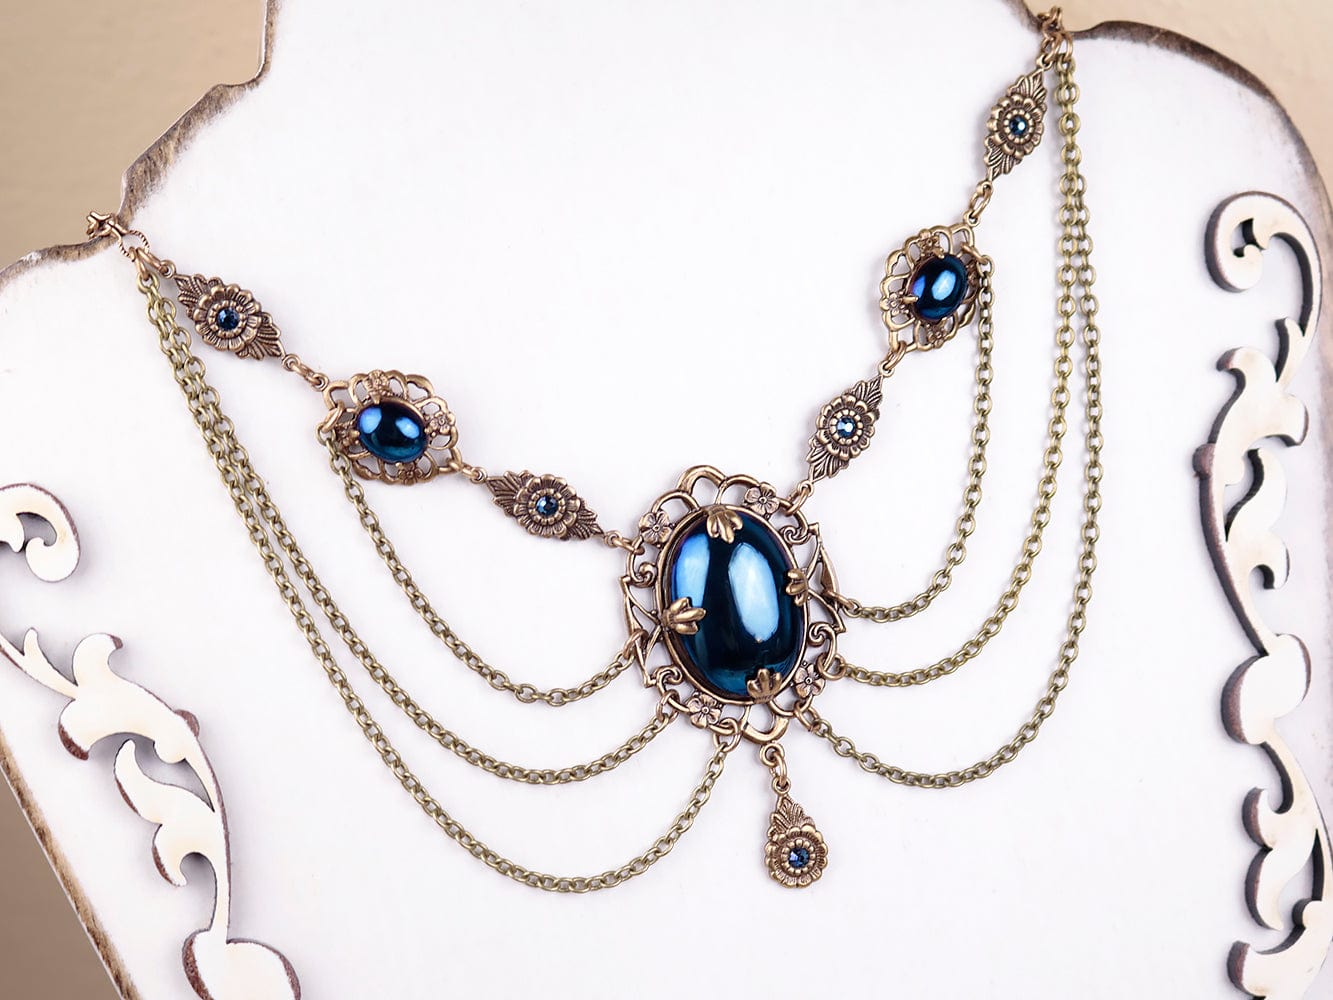 Drucilla Necklace in Blue Iris and Antiqued Brass by Rabbitwood and Reason